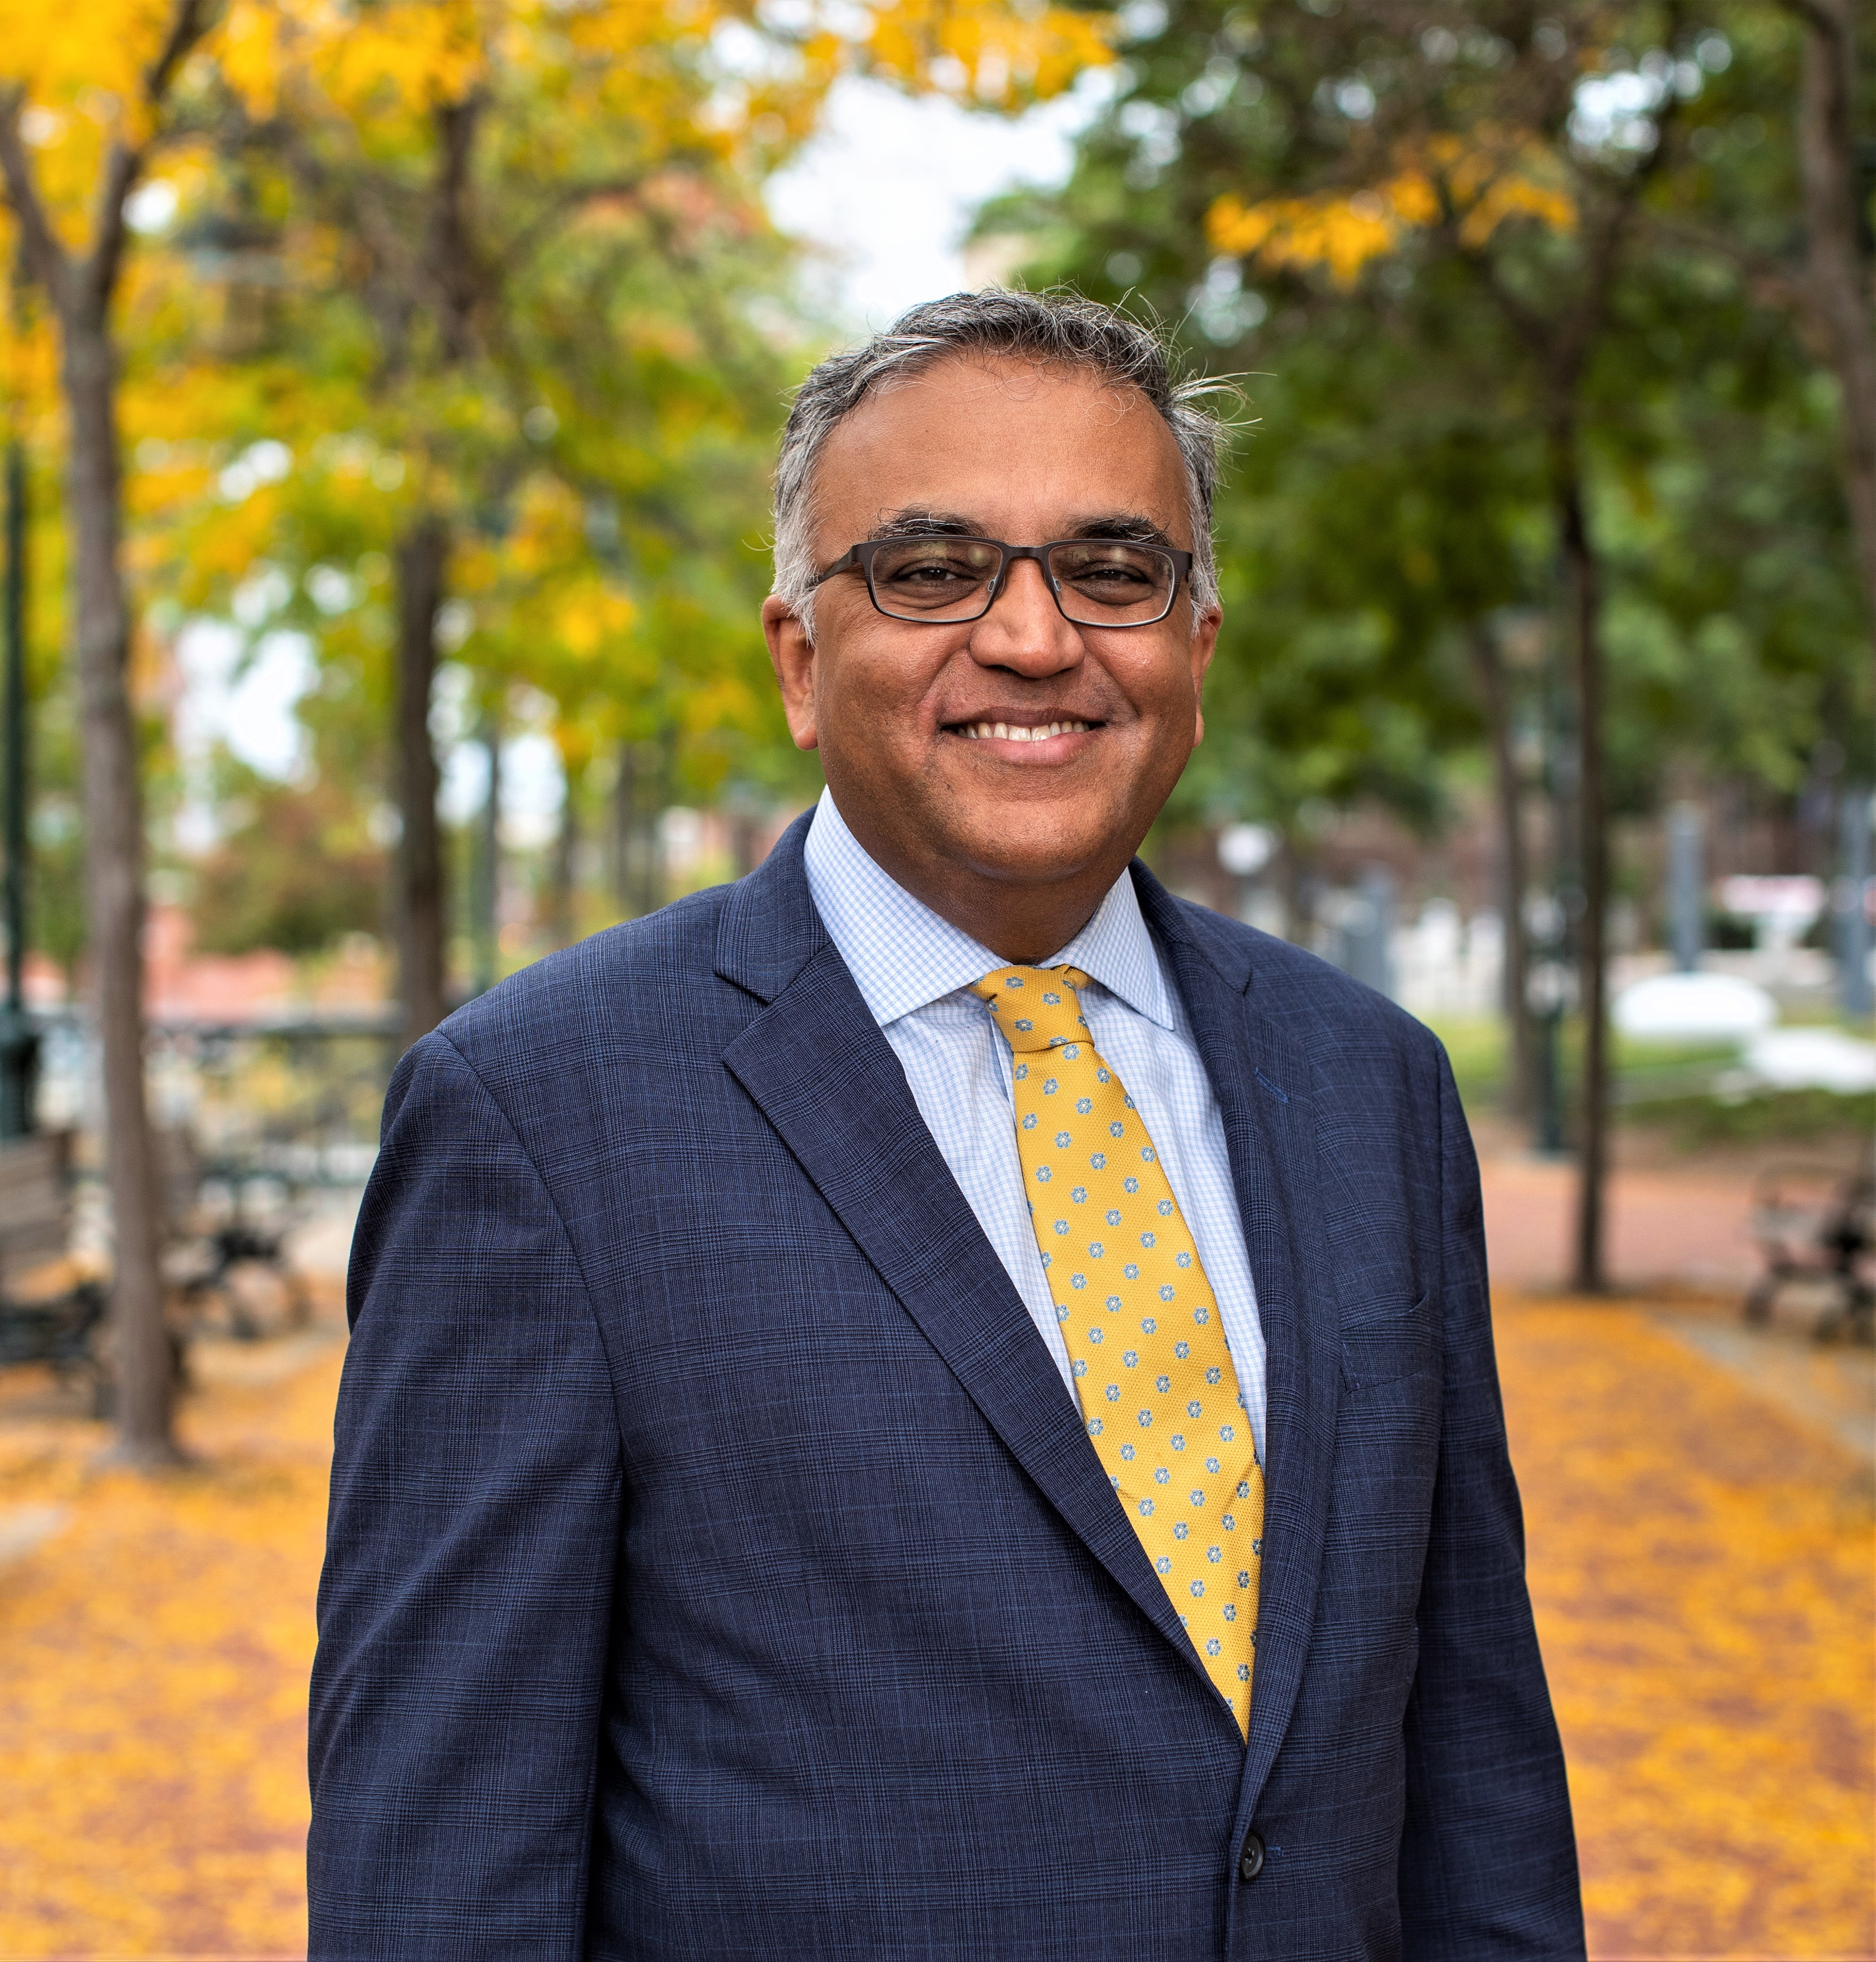 Welcome to Episode 36 of “COVID: What comes next,” an exclusive weekly Providence Journal/USA TODAY NETWORK podcast featuring Dr. Ashish Jha, dean of the Brown University School of Public Health and an internationally respected expert on pandemic response and preparedness